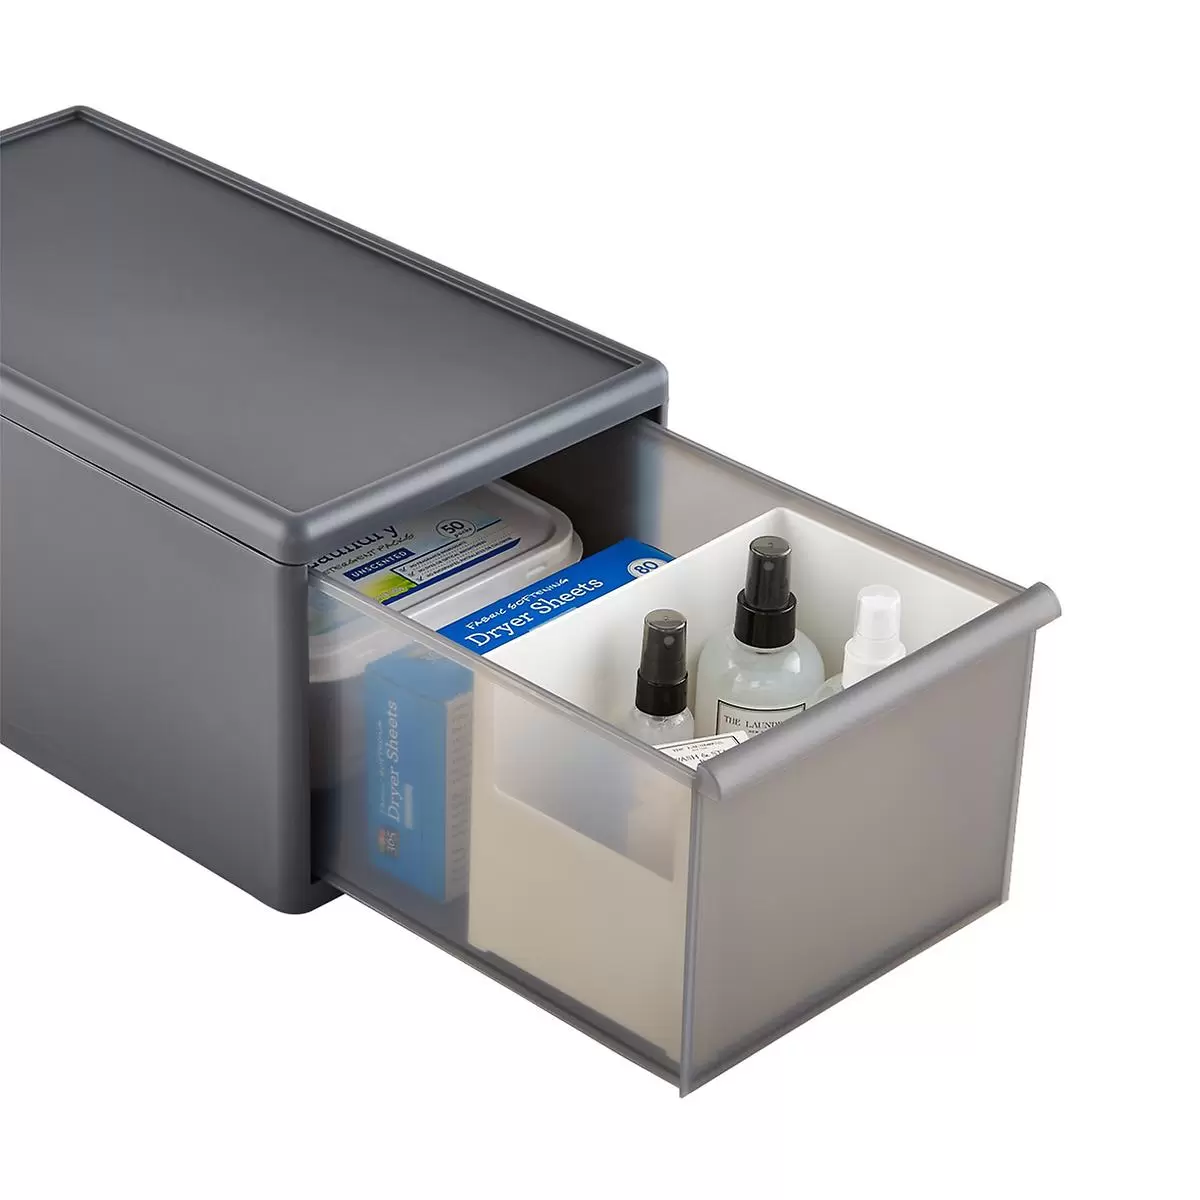 A grey plastic storage drawer contains laundry and cleaning supplies.